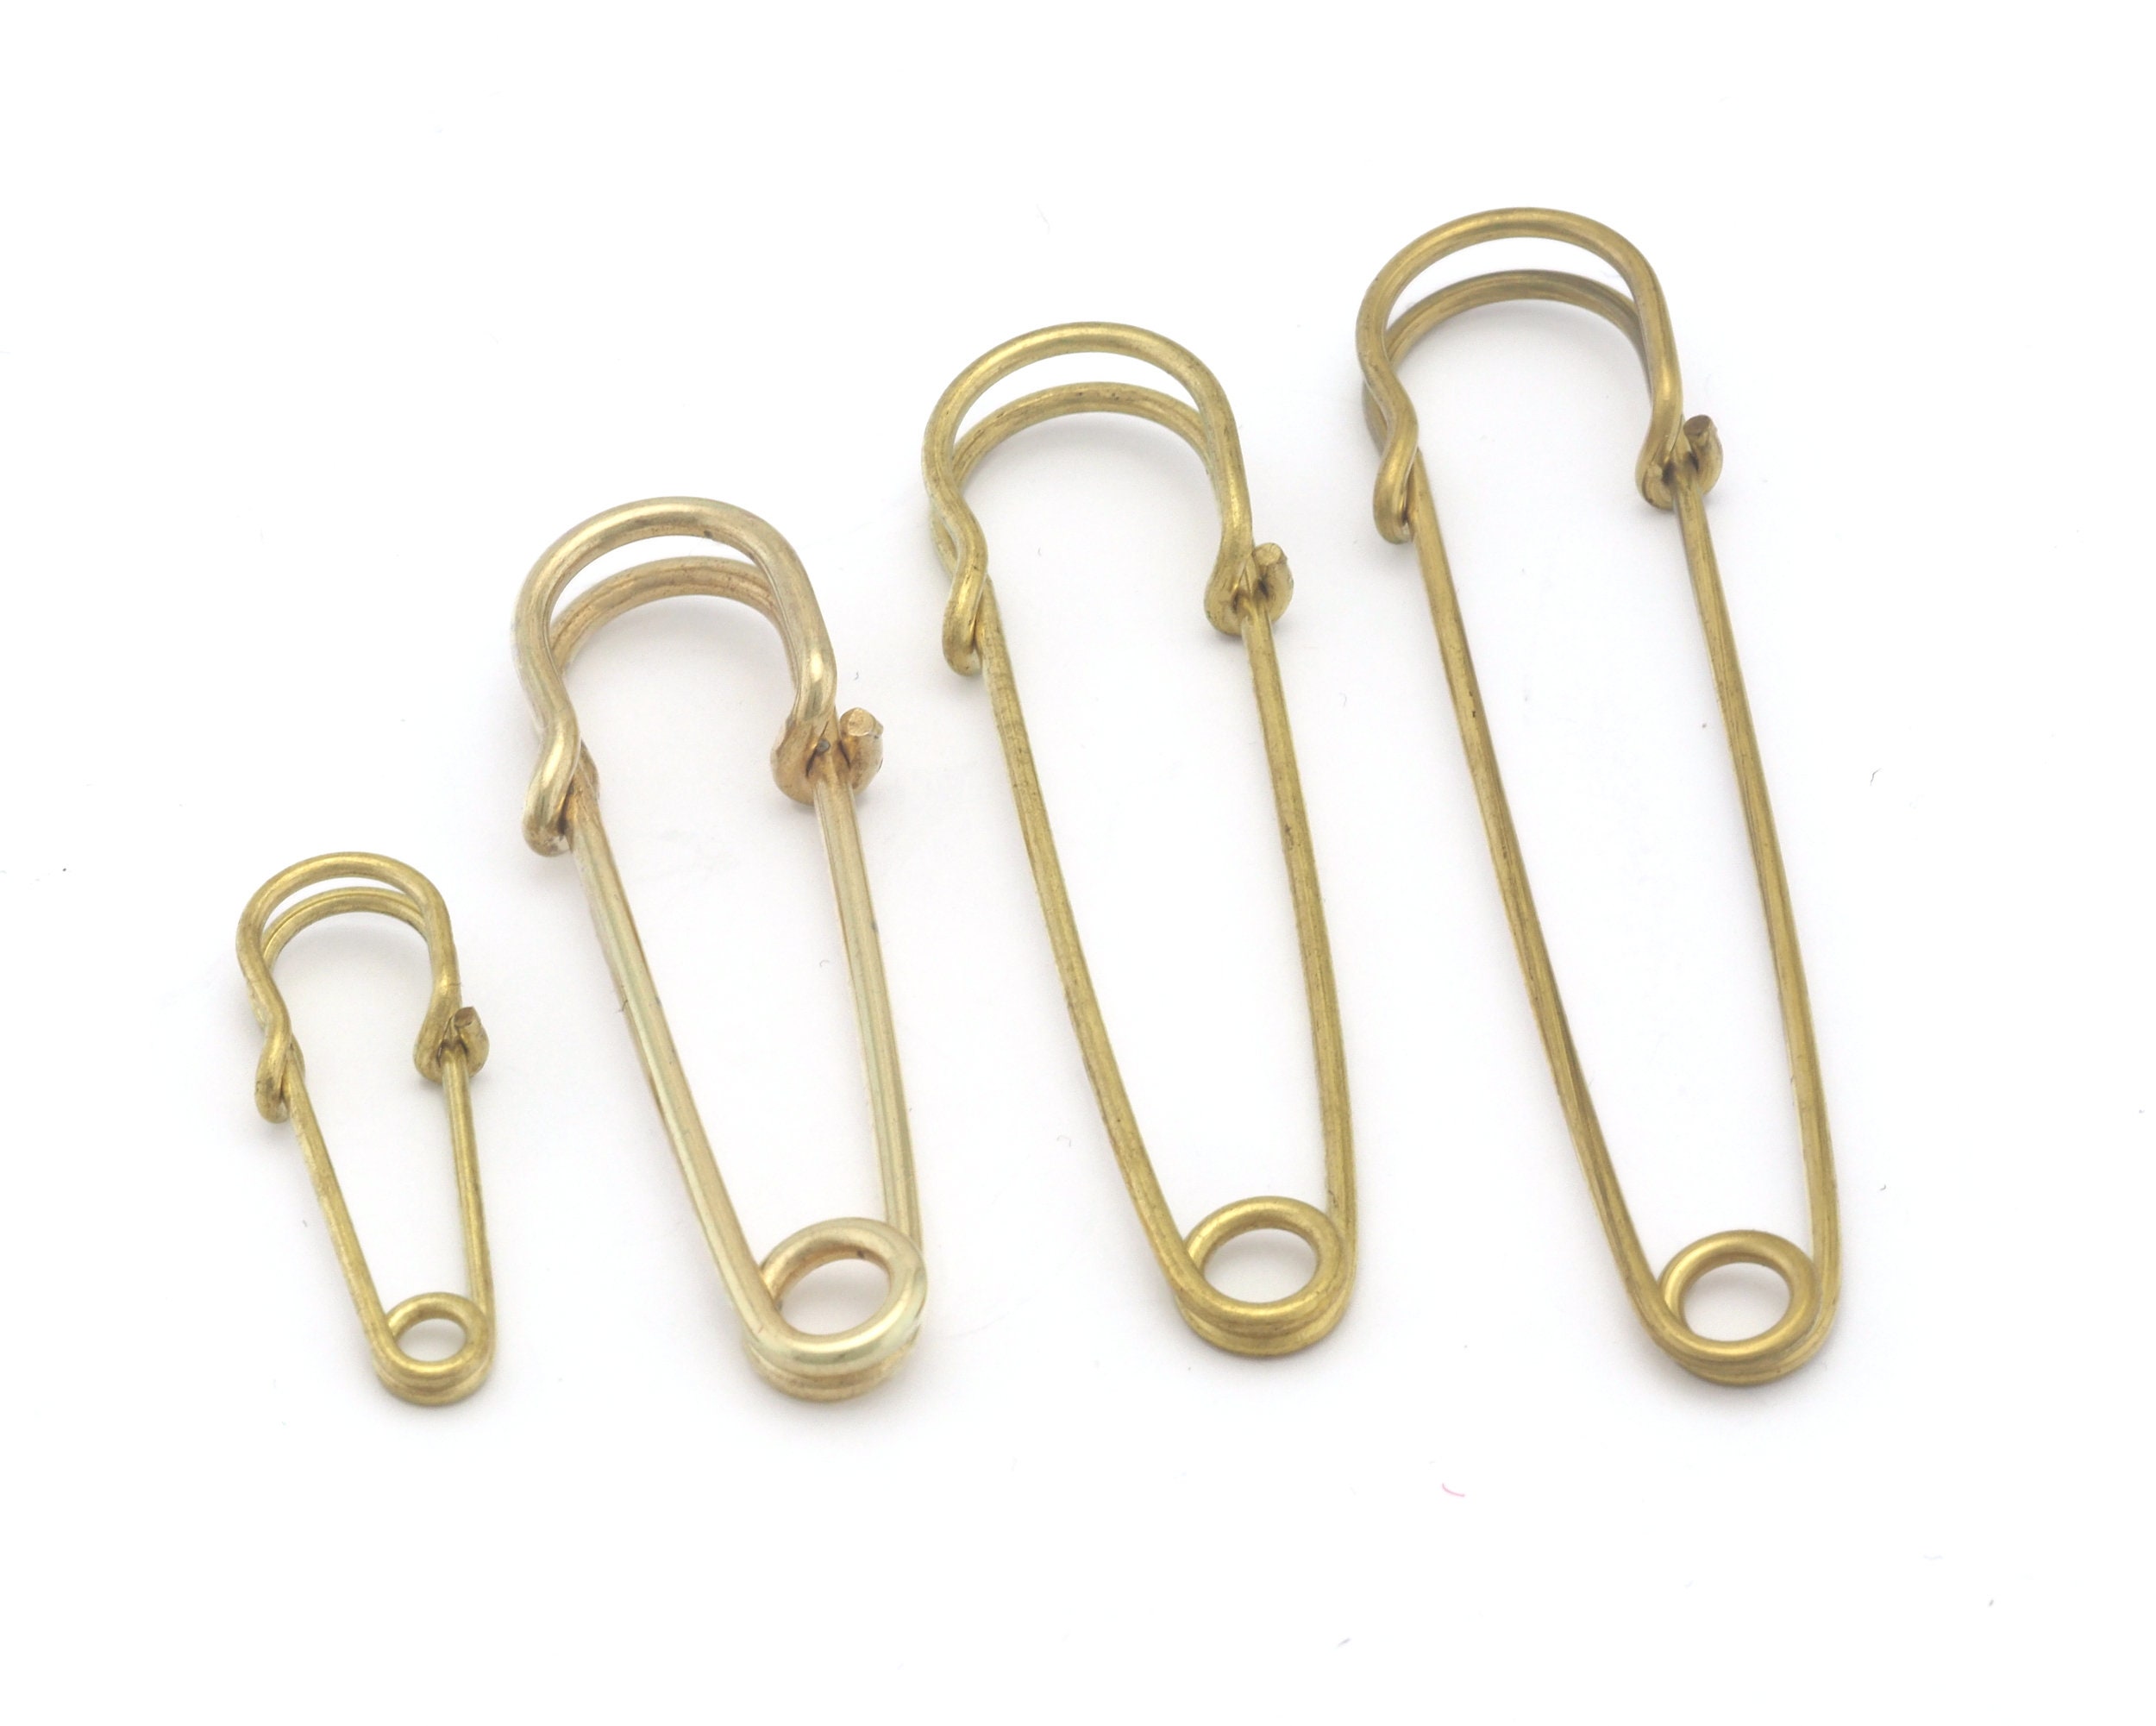 Extra Large Safety Pin Giant / Jumbo Horse Blanket Pins /craft Supplies for  Creative Crafting Safety Pins 109mm/126mm Bz8 